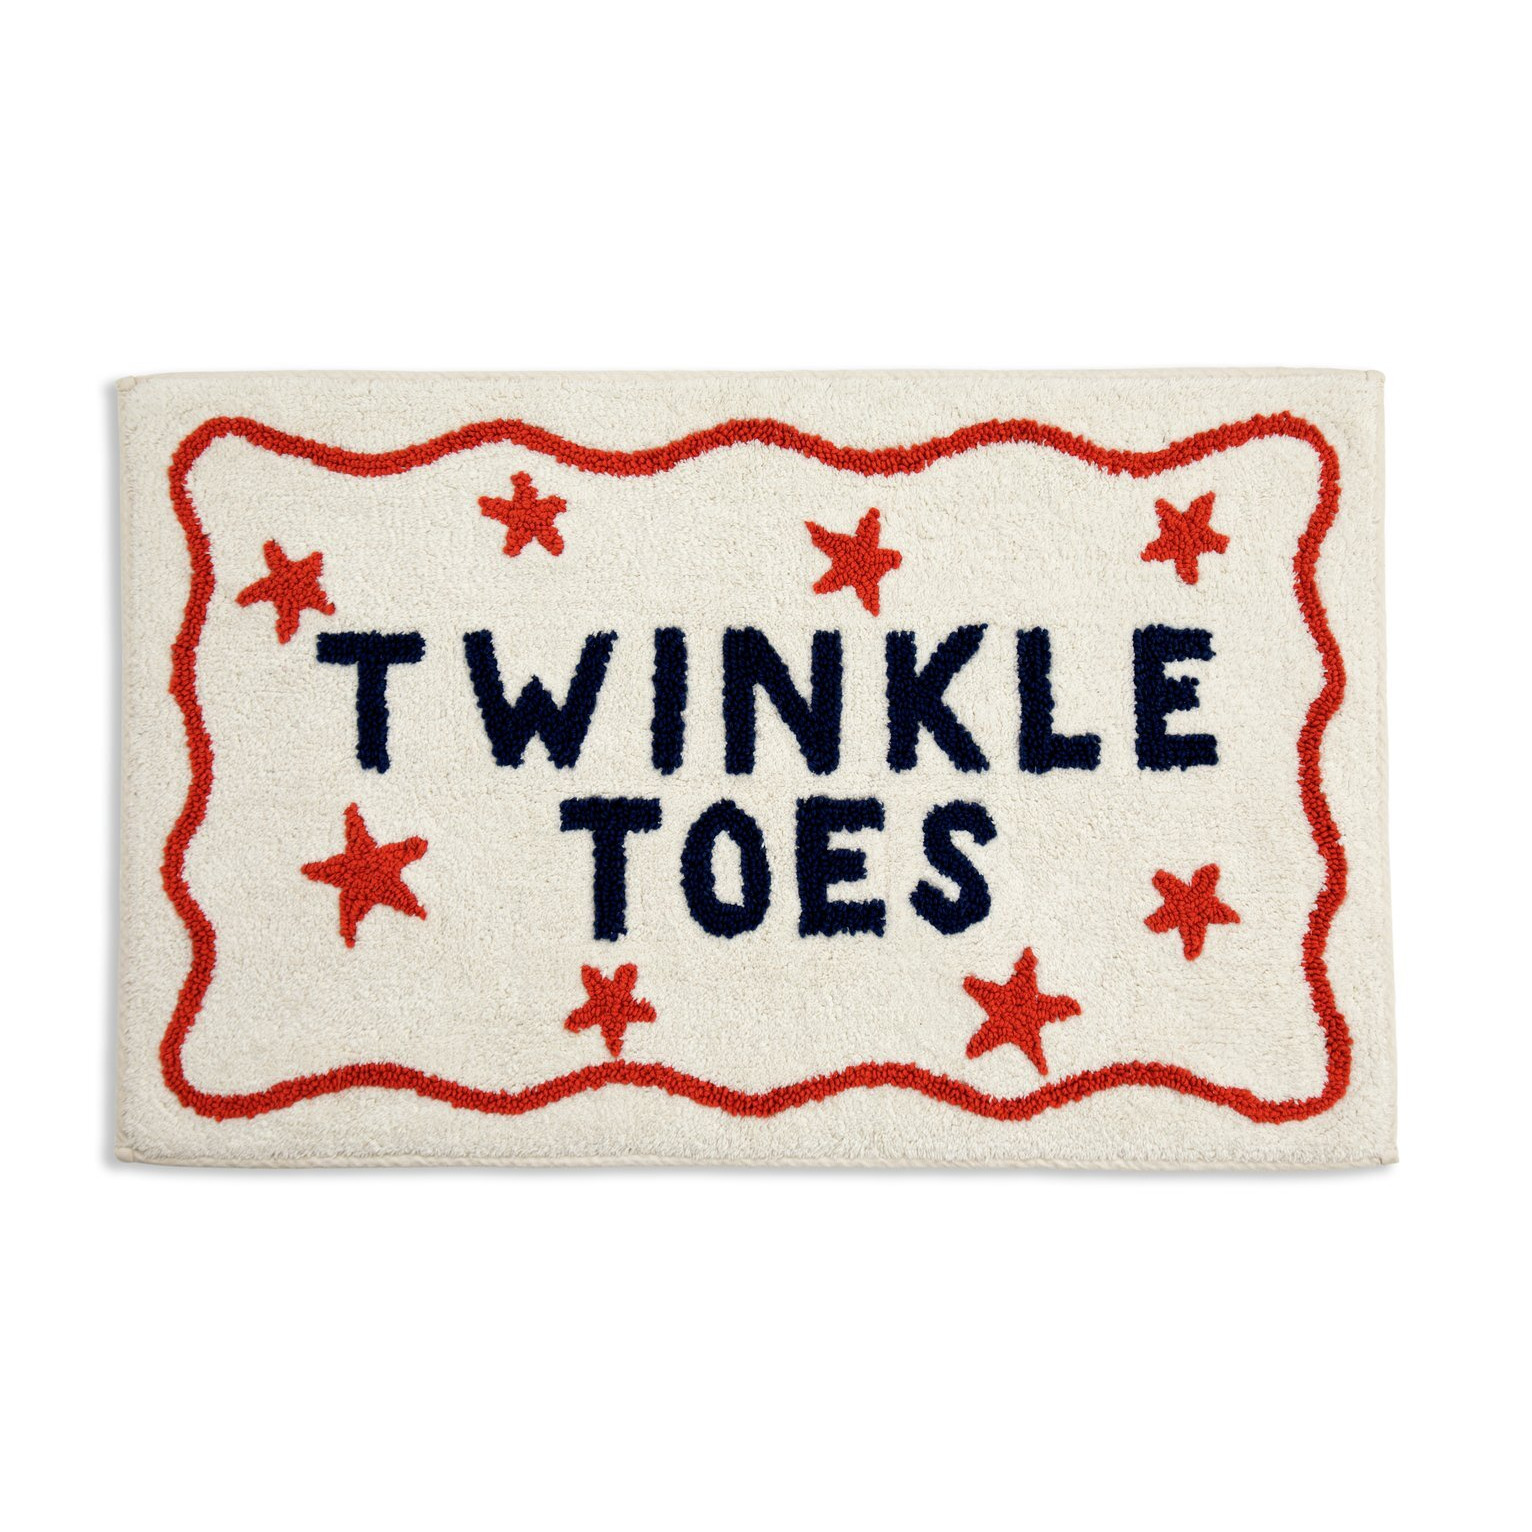 Habitat Cotton Tufted Twinkle Toes Bath Mat - White & Red - image 1